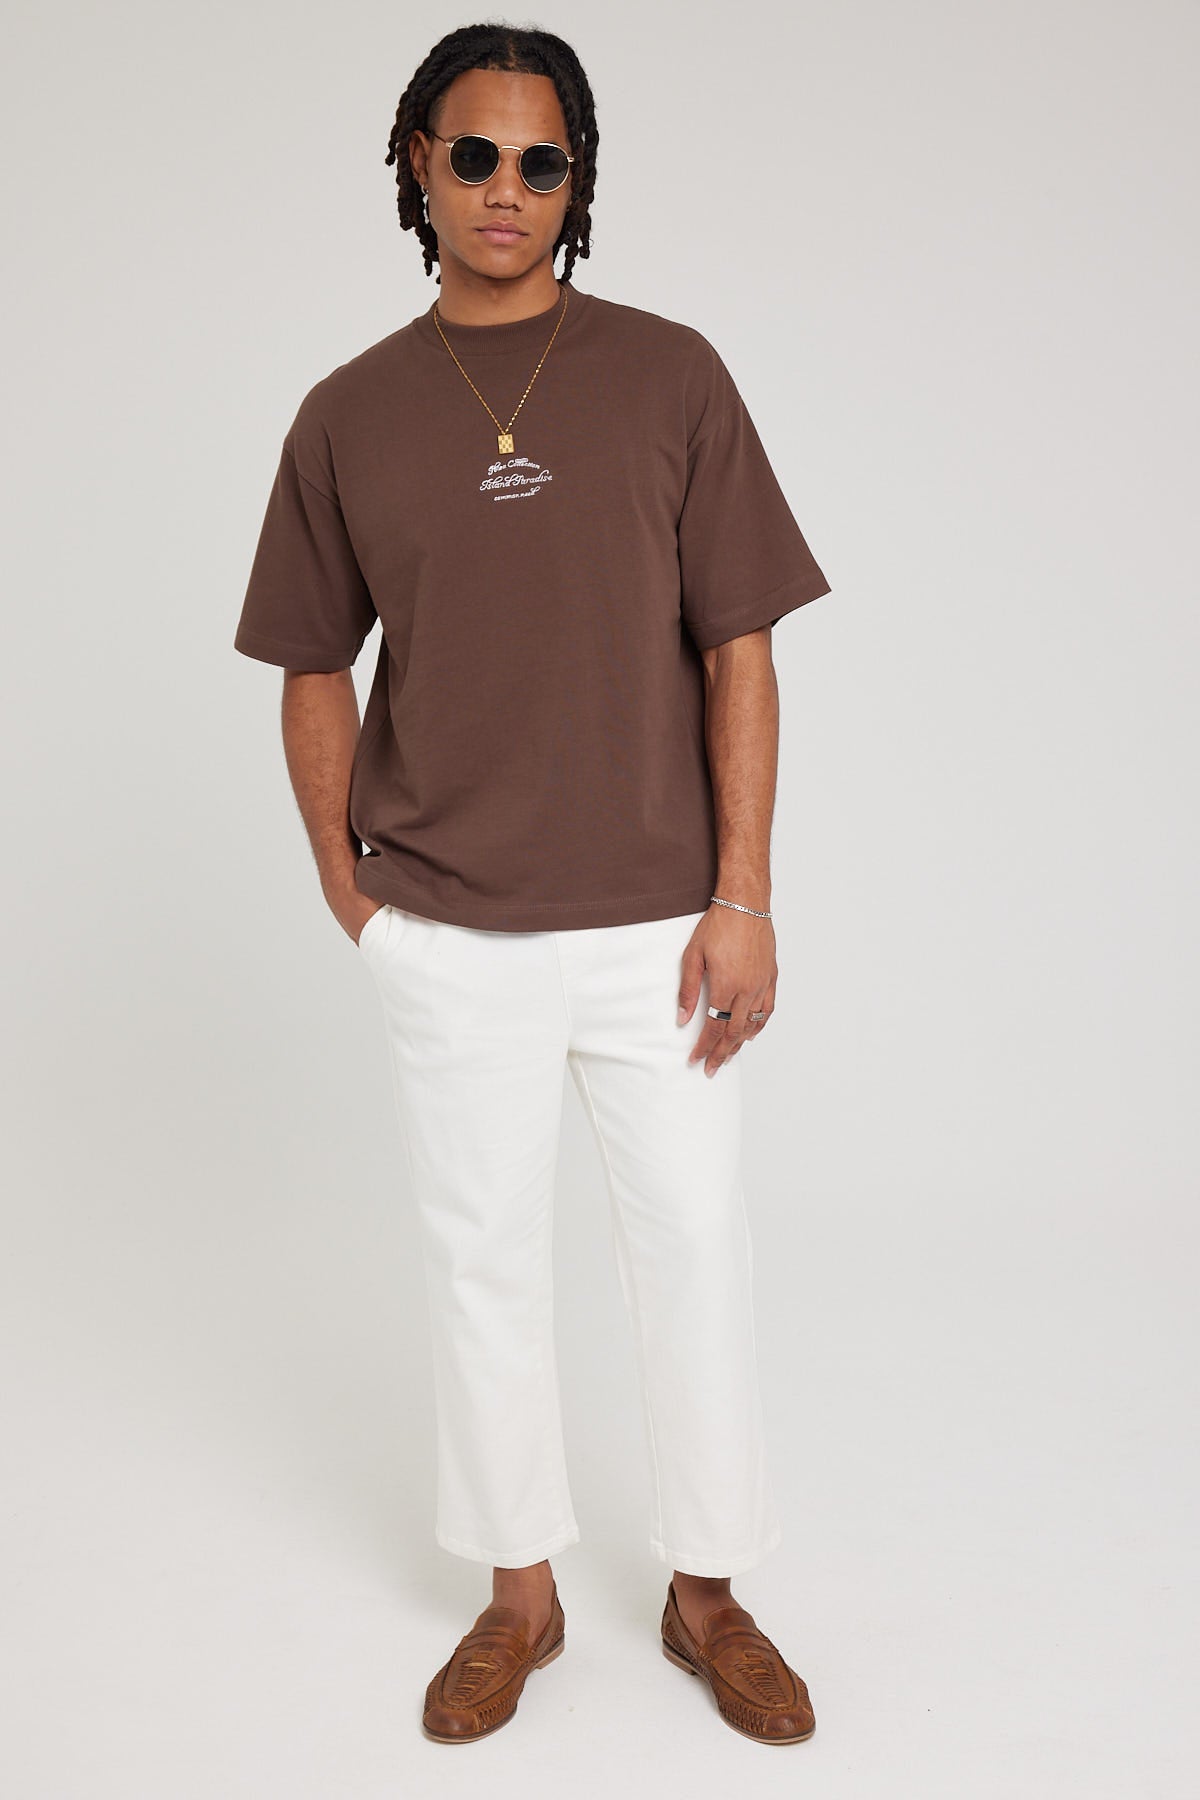 Common Need Island Paradise Easy Tee Brown – Universal Store